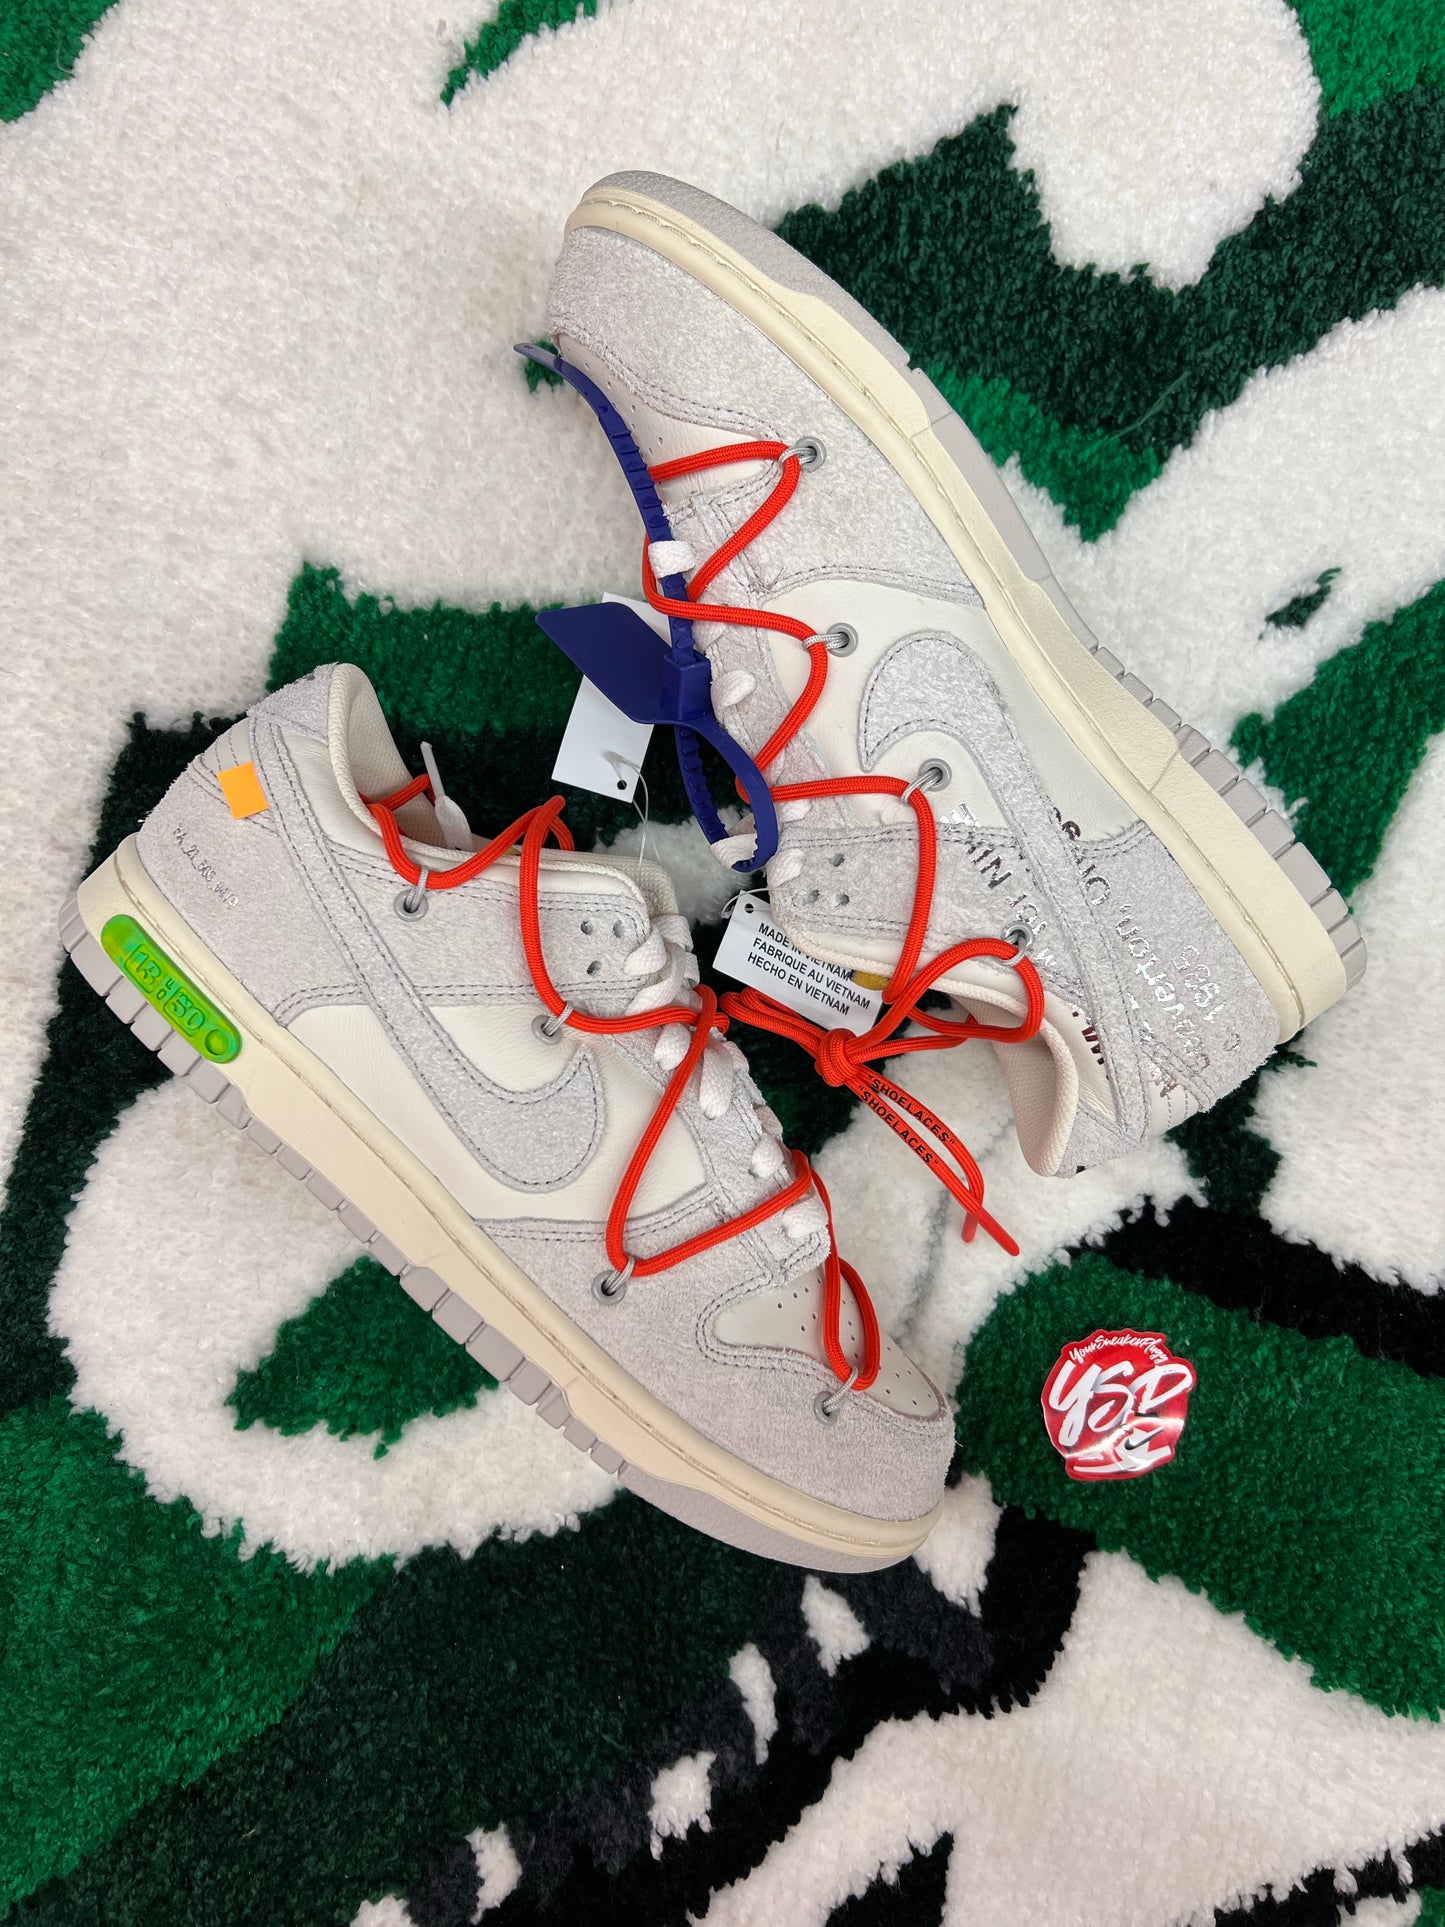 Nike Dunk Low OFF-WHITE/ LOT 13